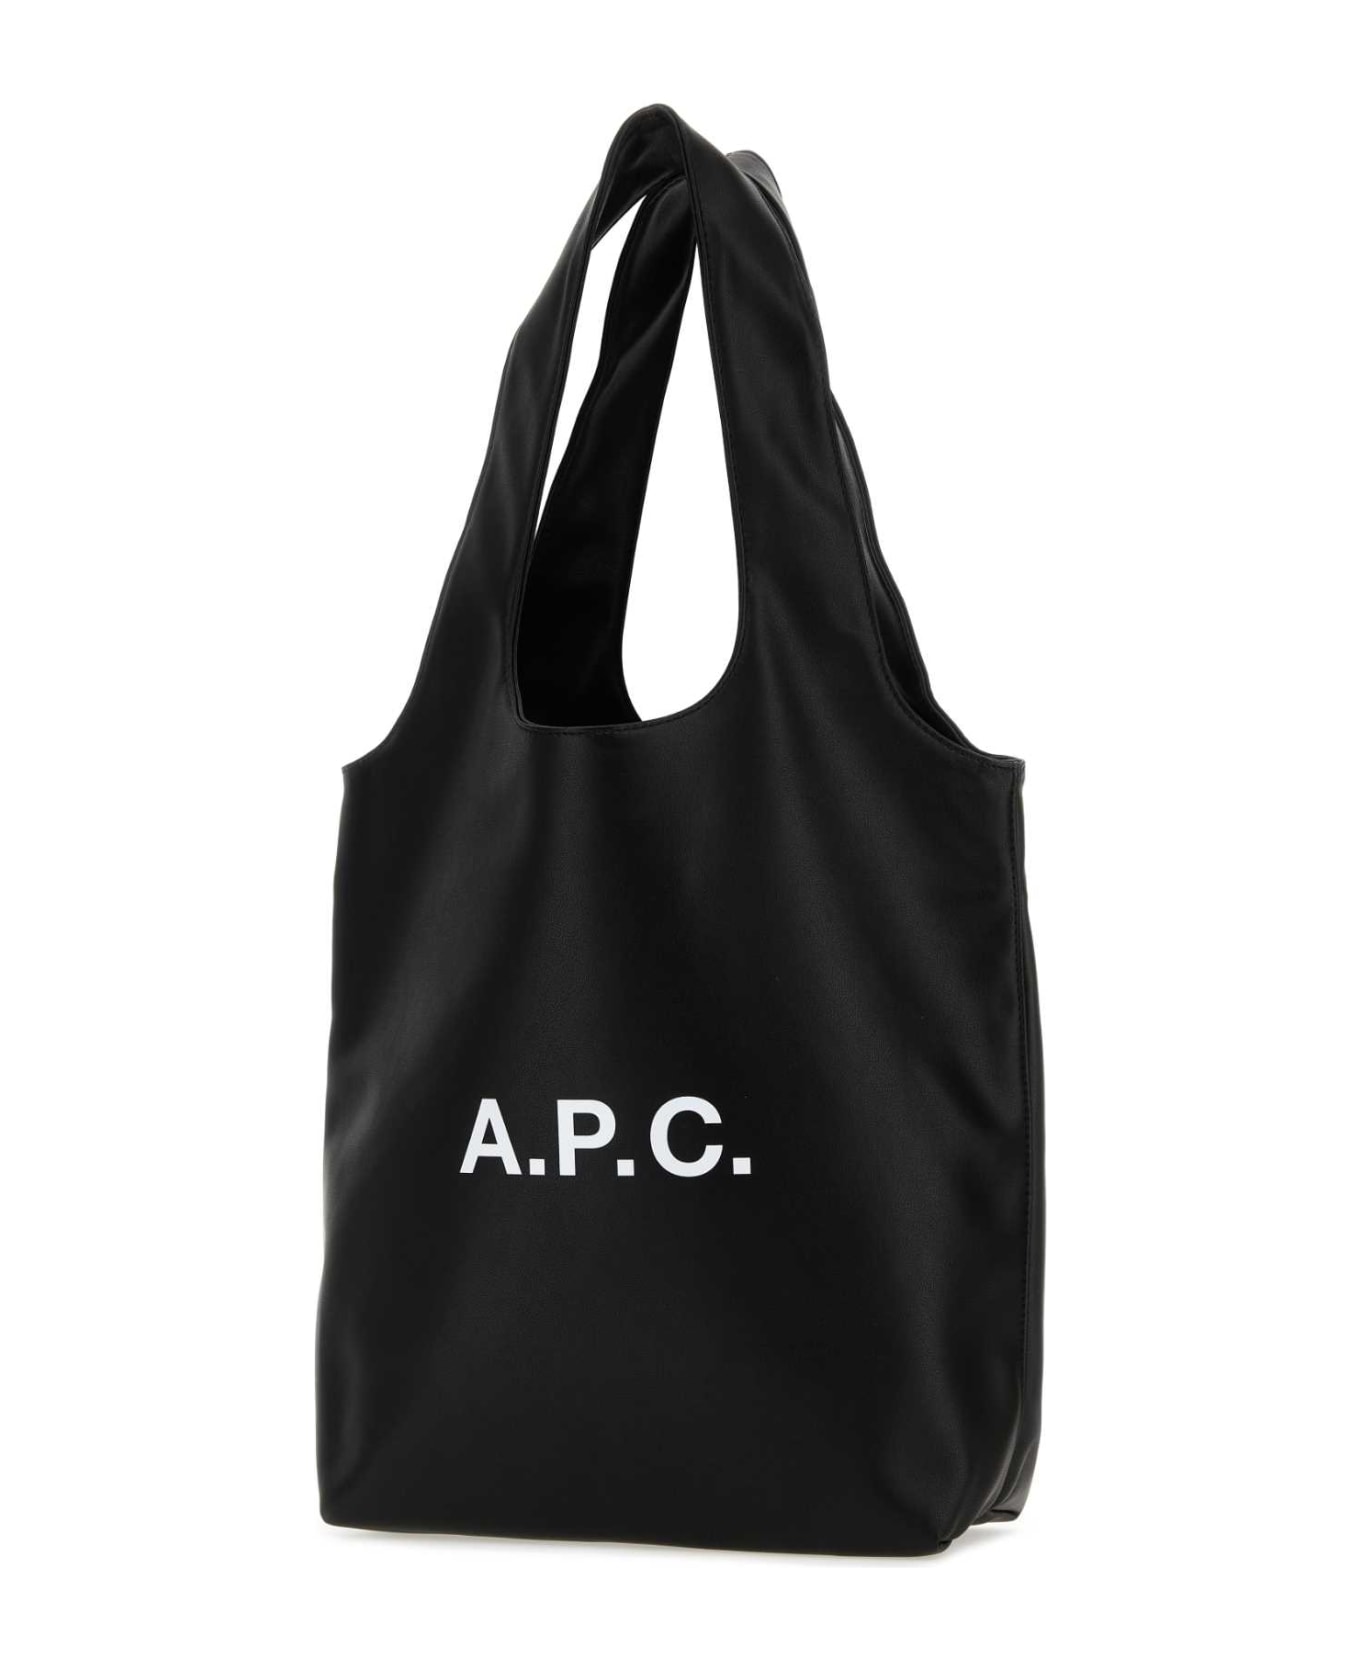 A.P.C. Black Synthetic Leather Shopping Bag - LZZBLACK